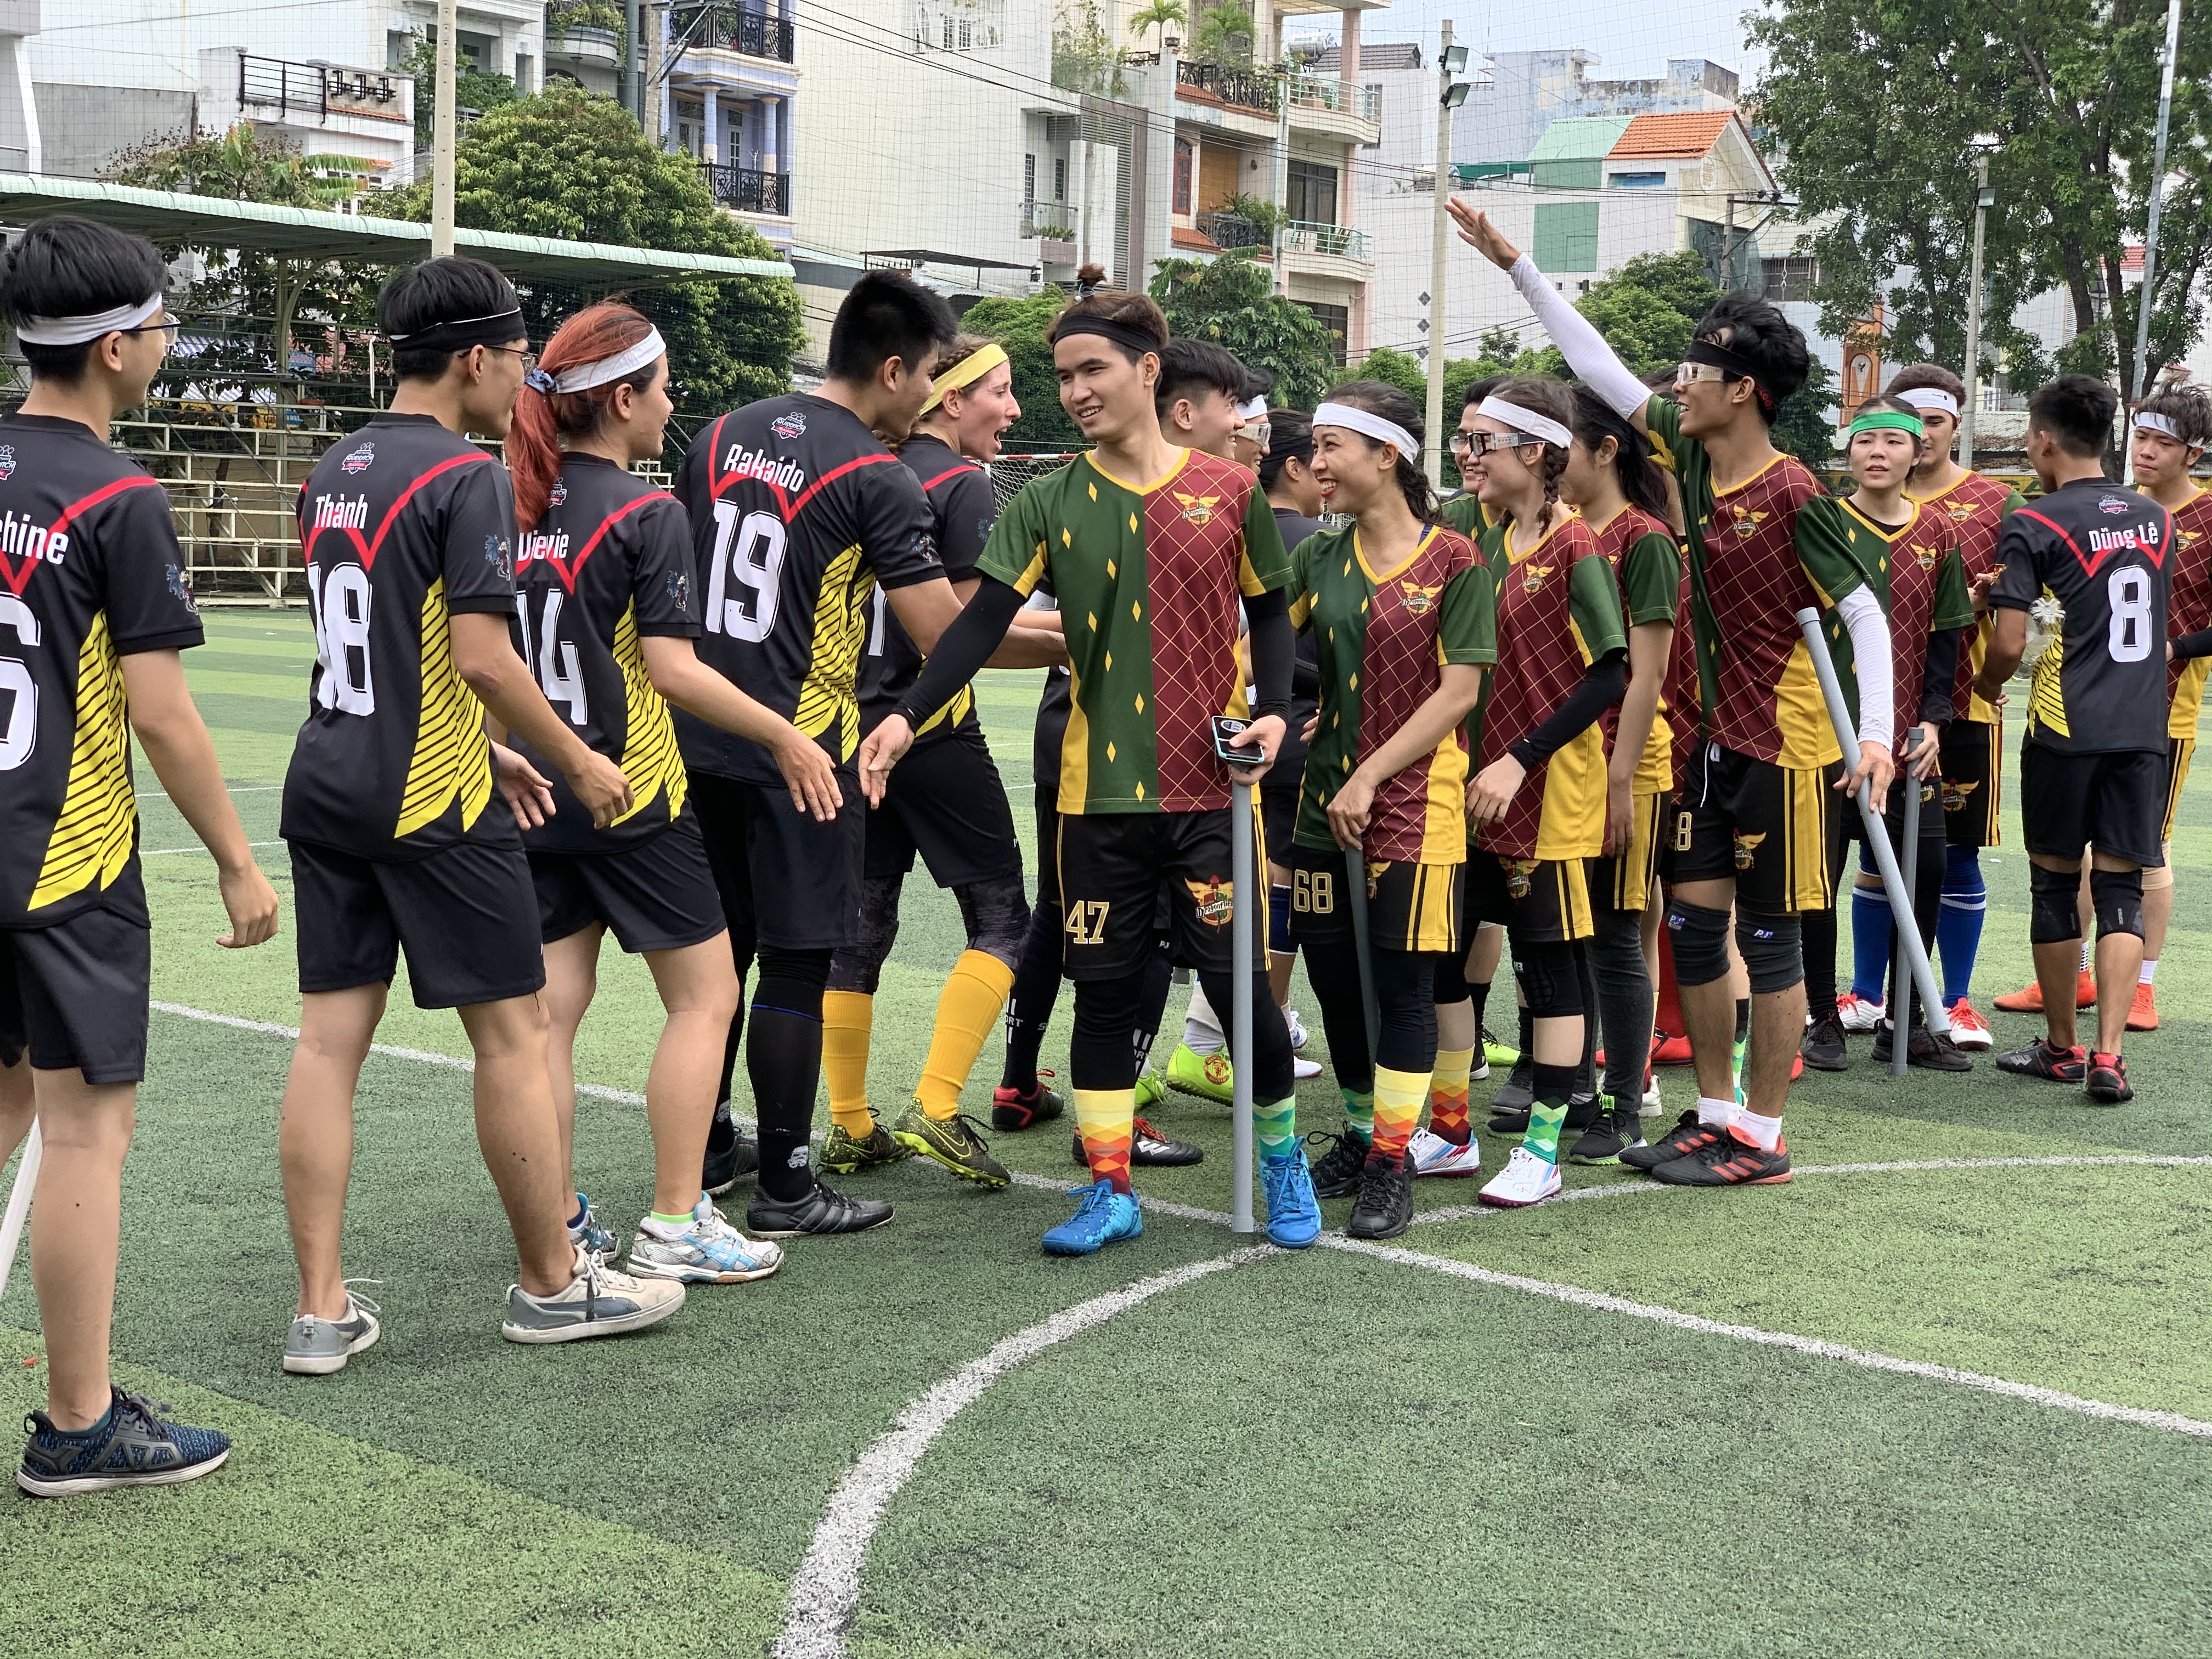 Players shake hand after a match in the maiden Vietnam Quidditch Cup organized by the Vietnam Quidditch Association  in Tan Binh District, Ho Chi Minh City, November 10, 2019. Photo: Bao Anh / Tuoi Tre News